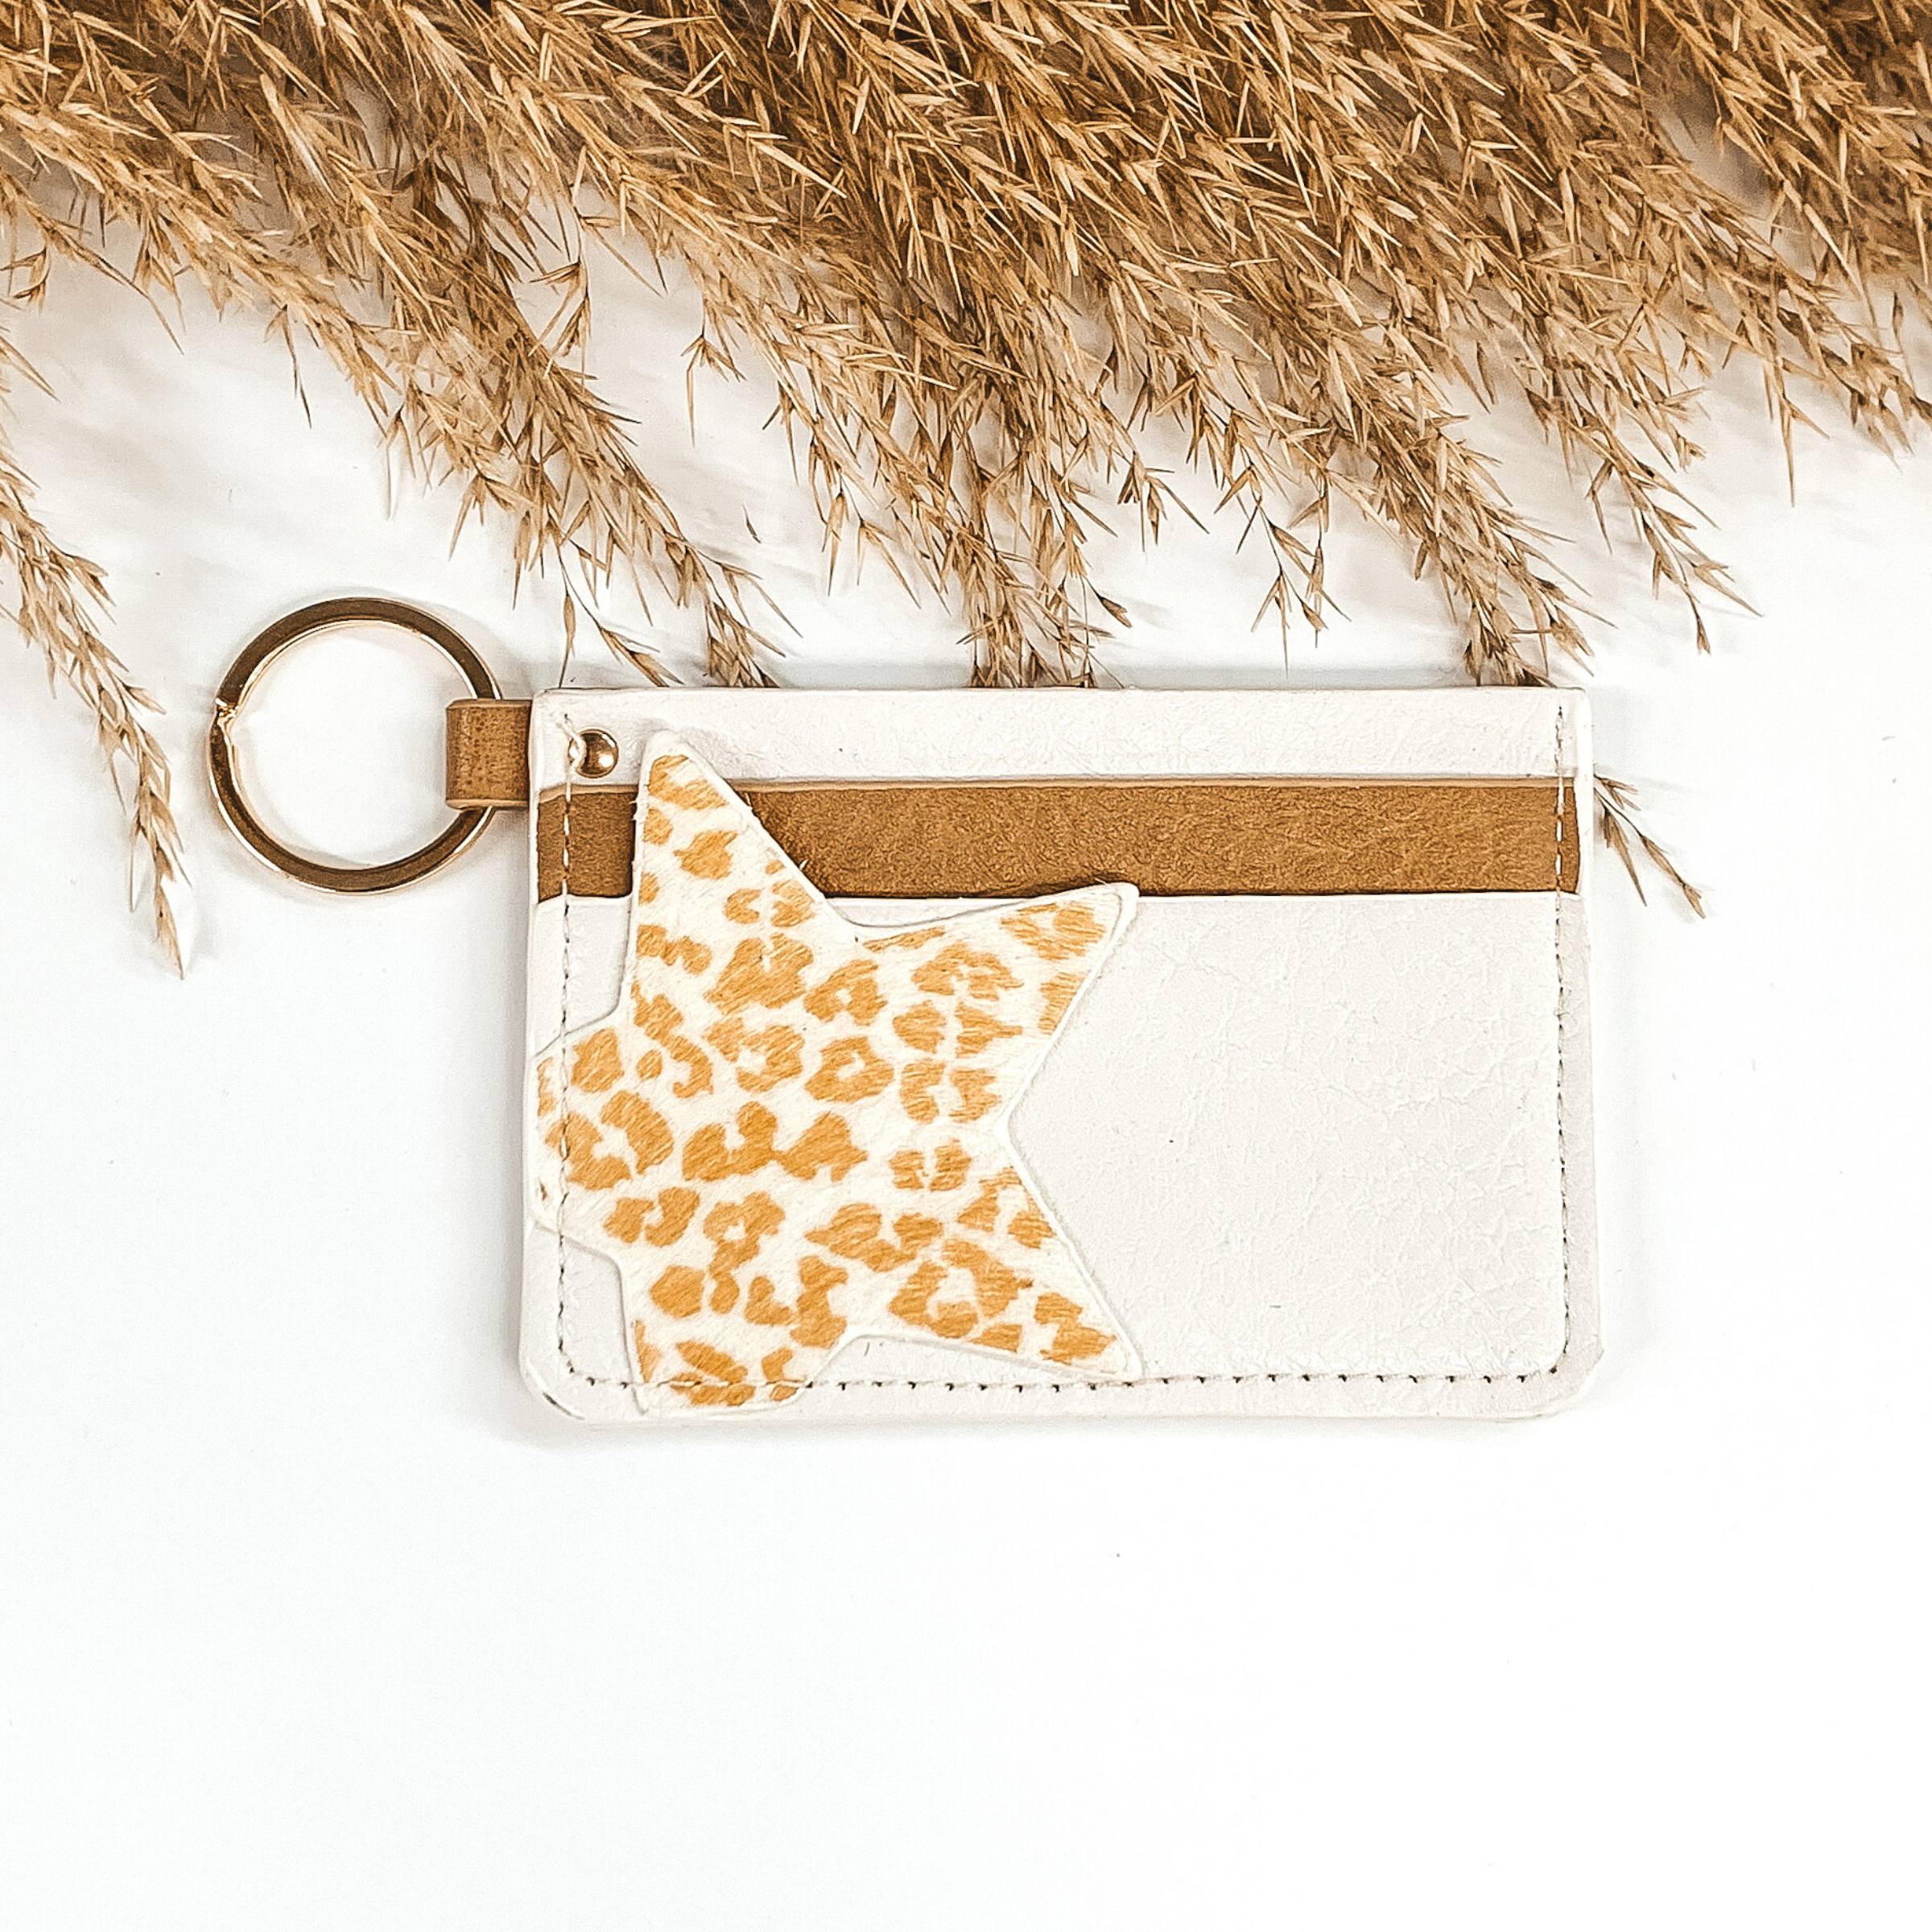 This is a rectangle id key holder that has a gold key ring. On the front you have ivory and tan layer and then a white star with a tan leopard print is also on the front. It is pictured on a a white background that has brown floral at the top of the picture.